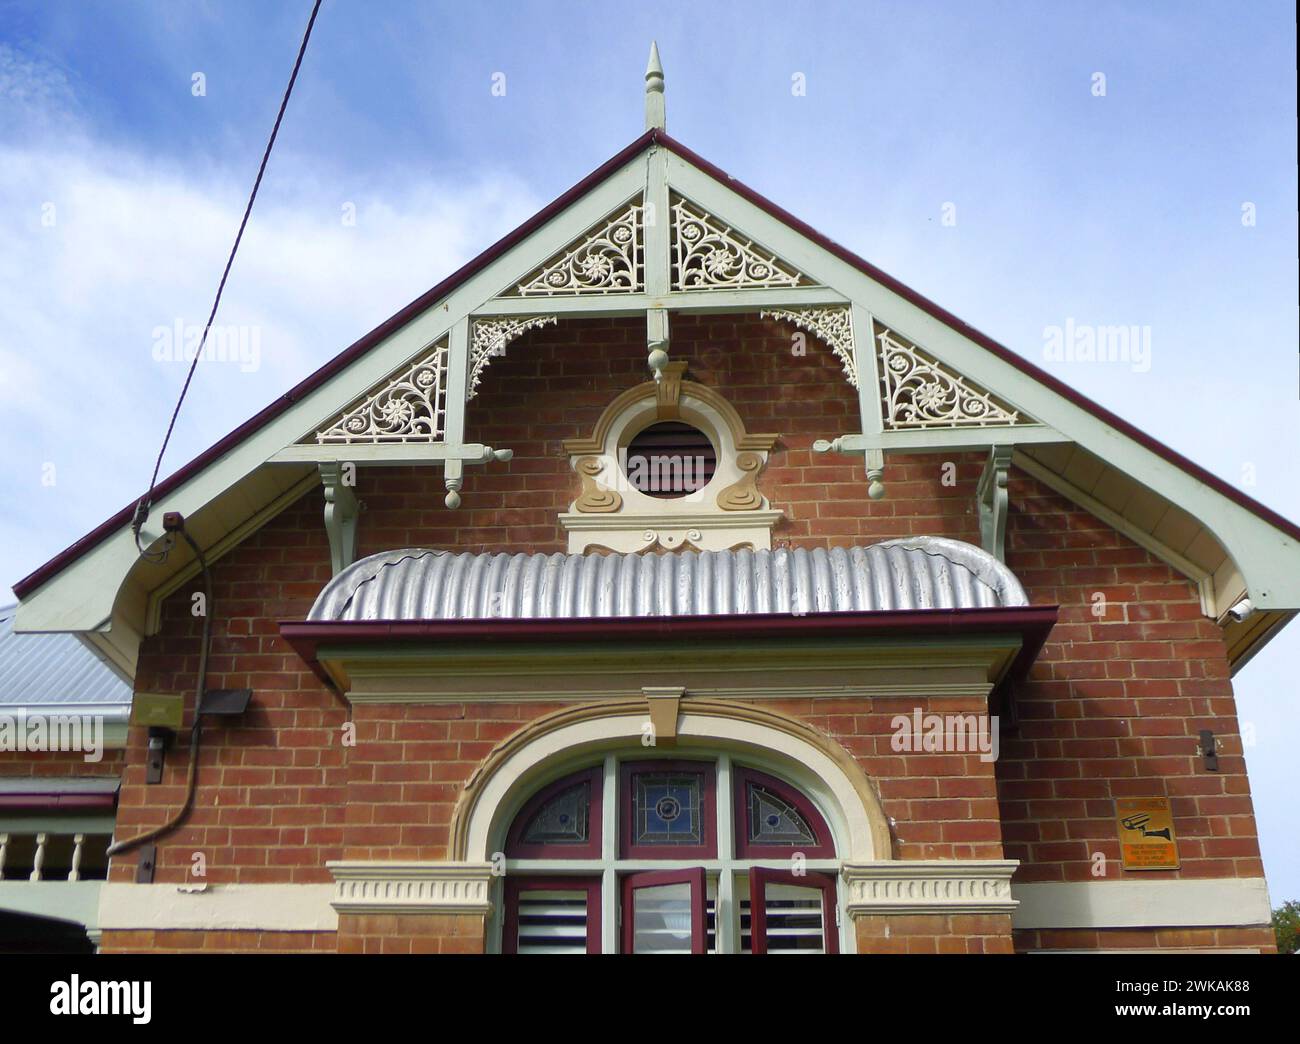 Historic red brick home with ornate architectural features, Bathurst, NSW, Australia. Stock Photo